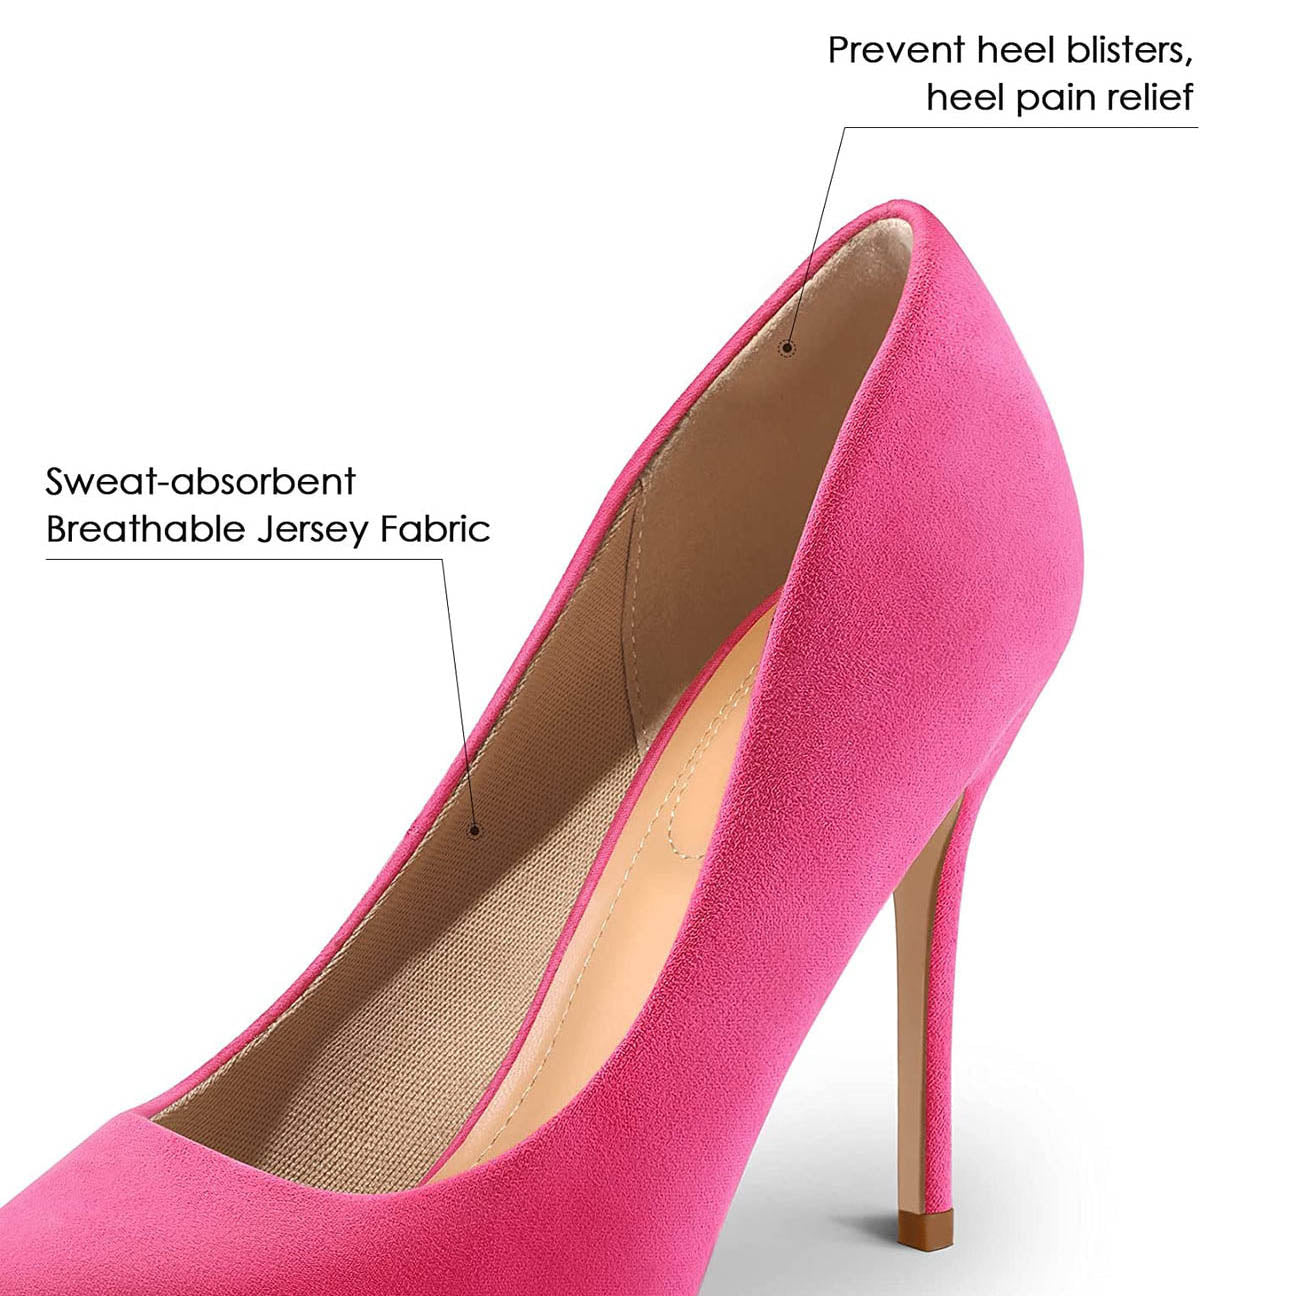 Block Heel Wedding Shoes: 28 Comfy but Stylish Designs - hitched.co.uk -  hitched.co.uk